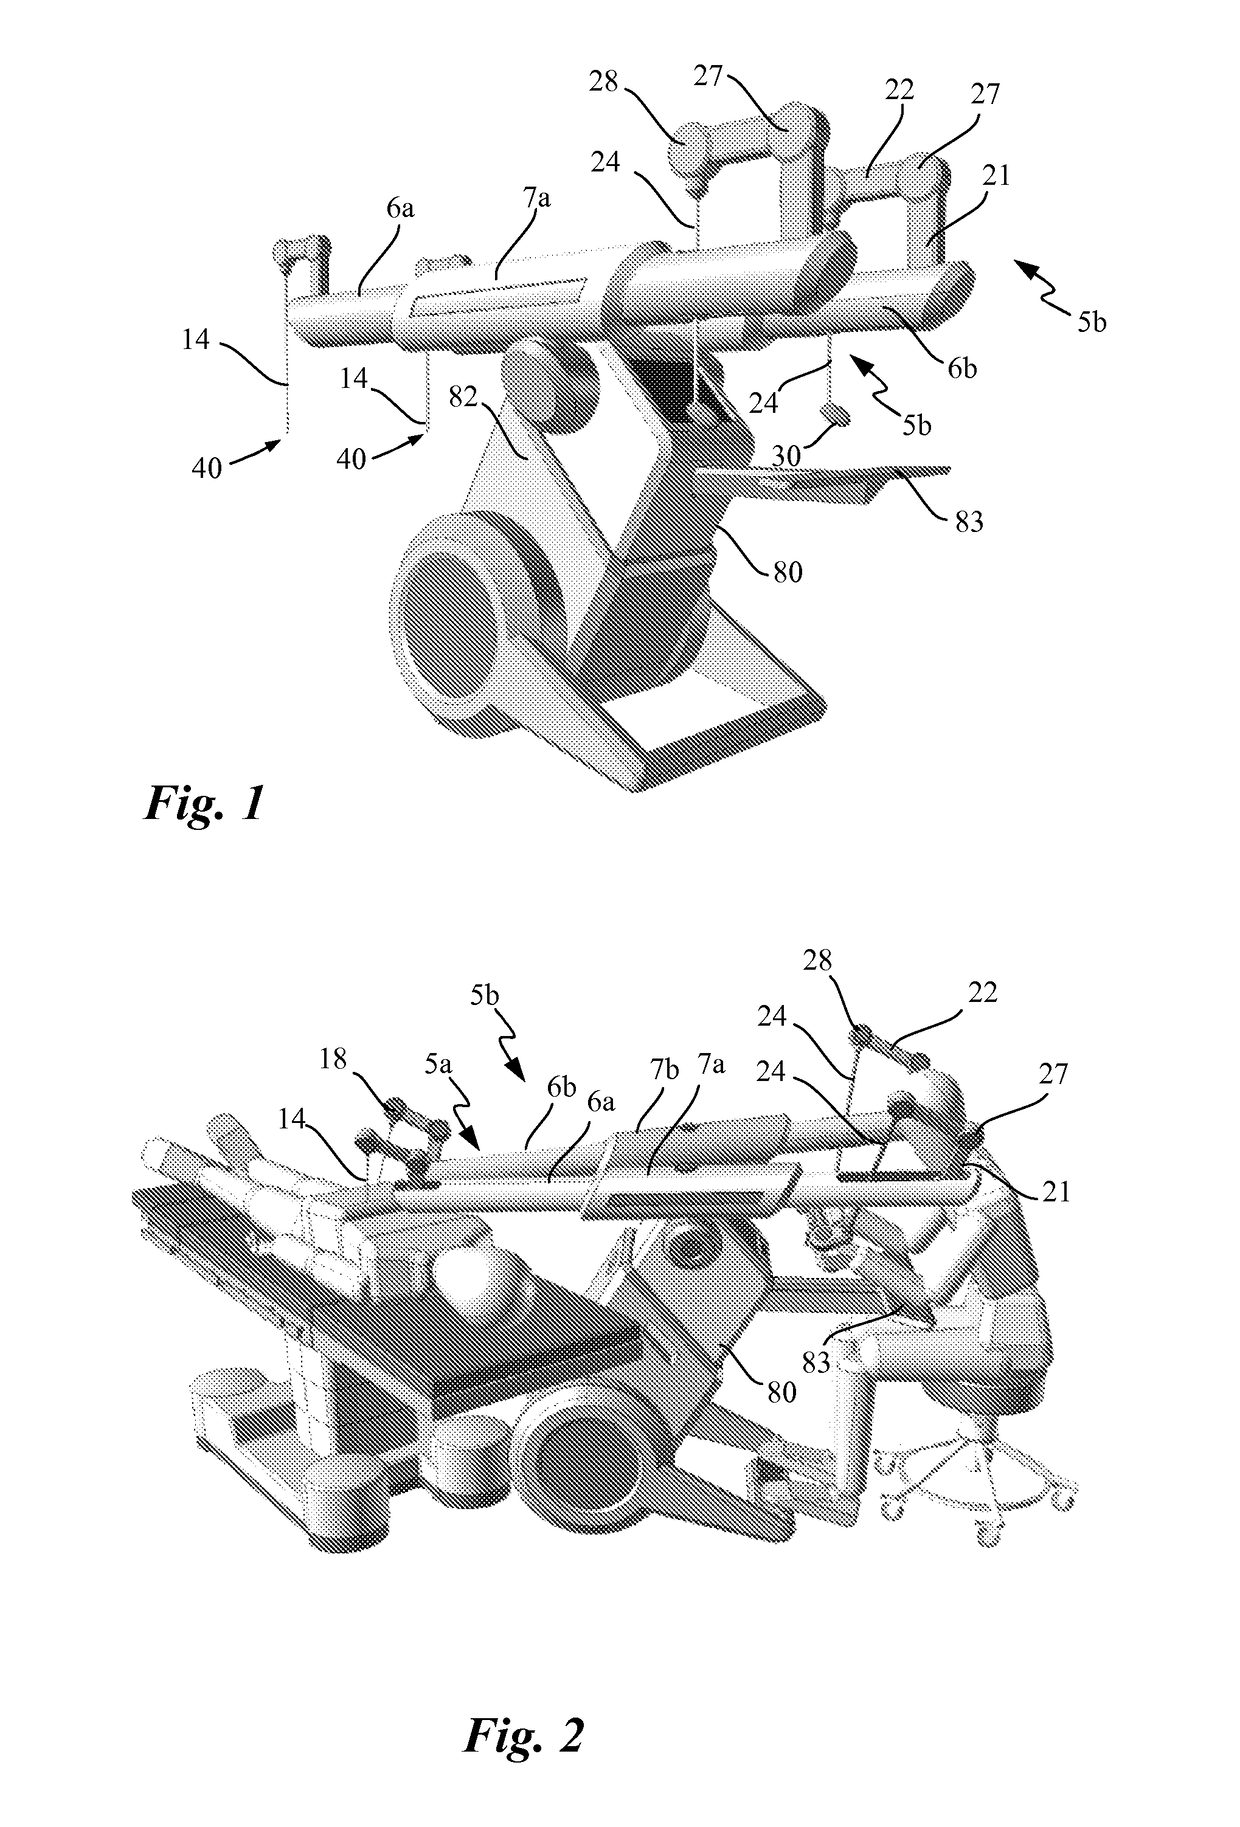 Mechanical teleoperated device for remote manipulation